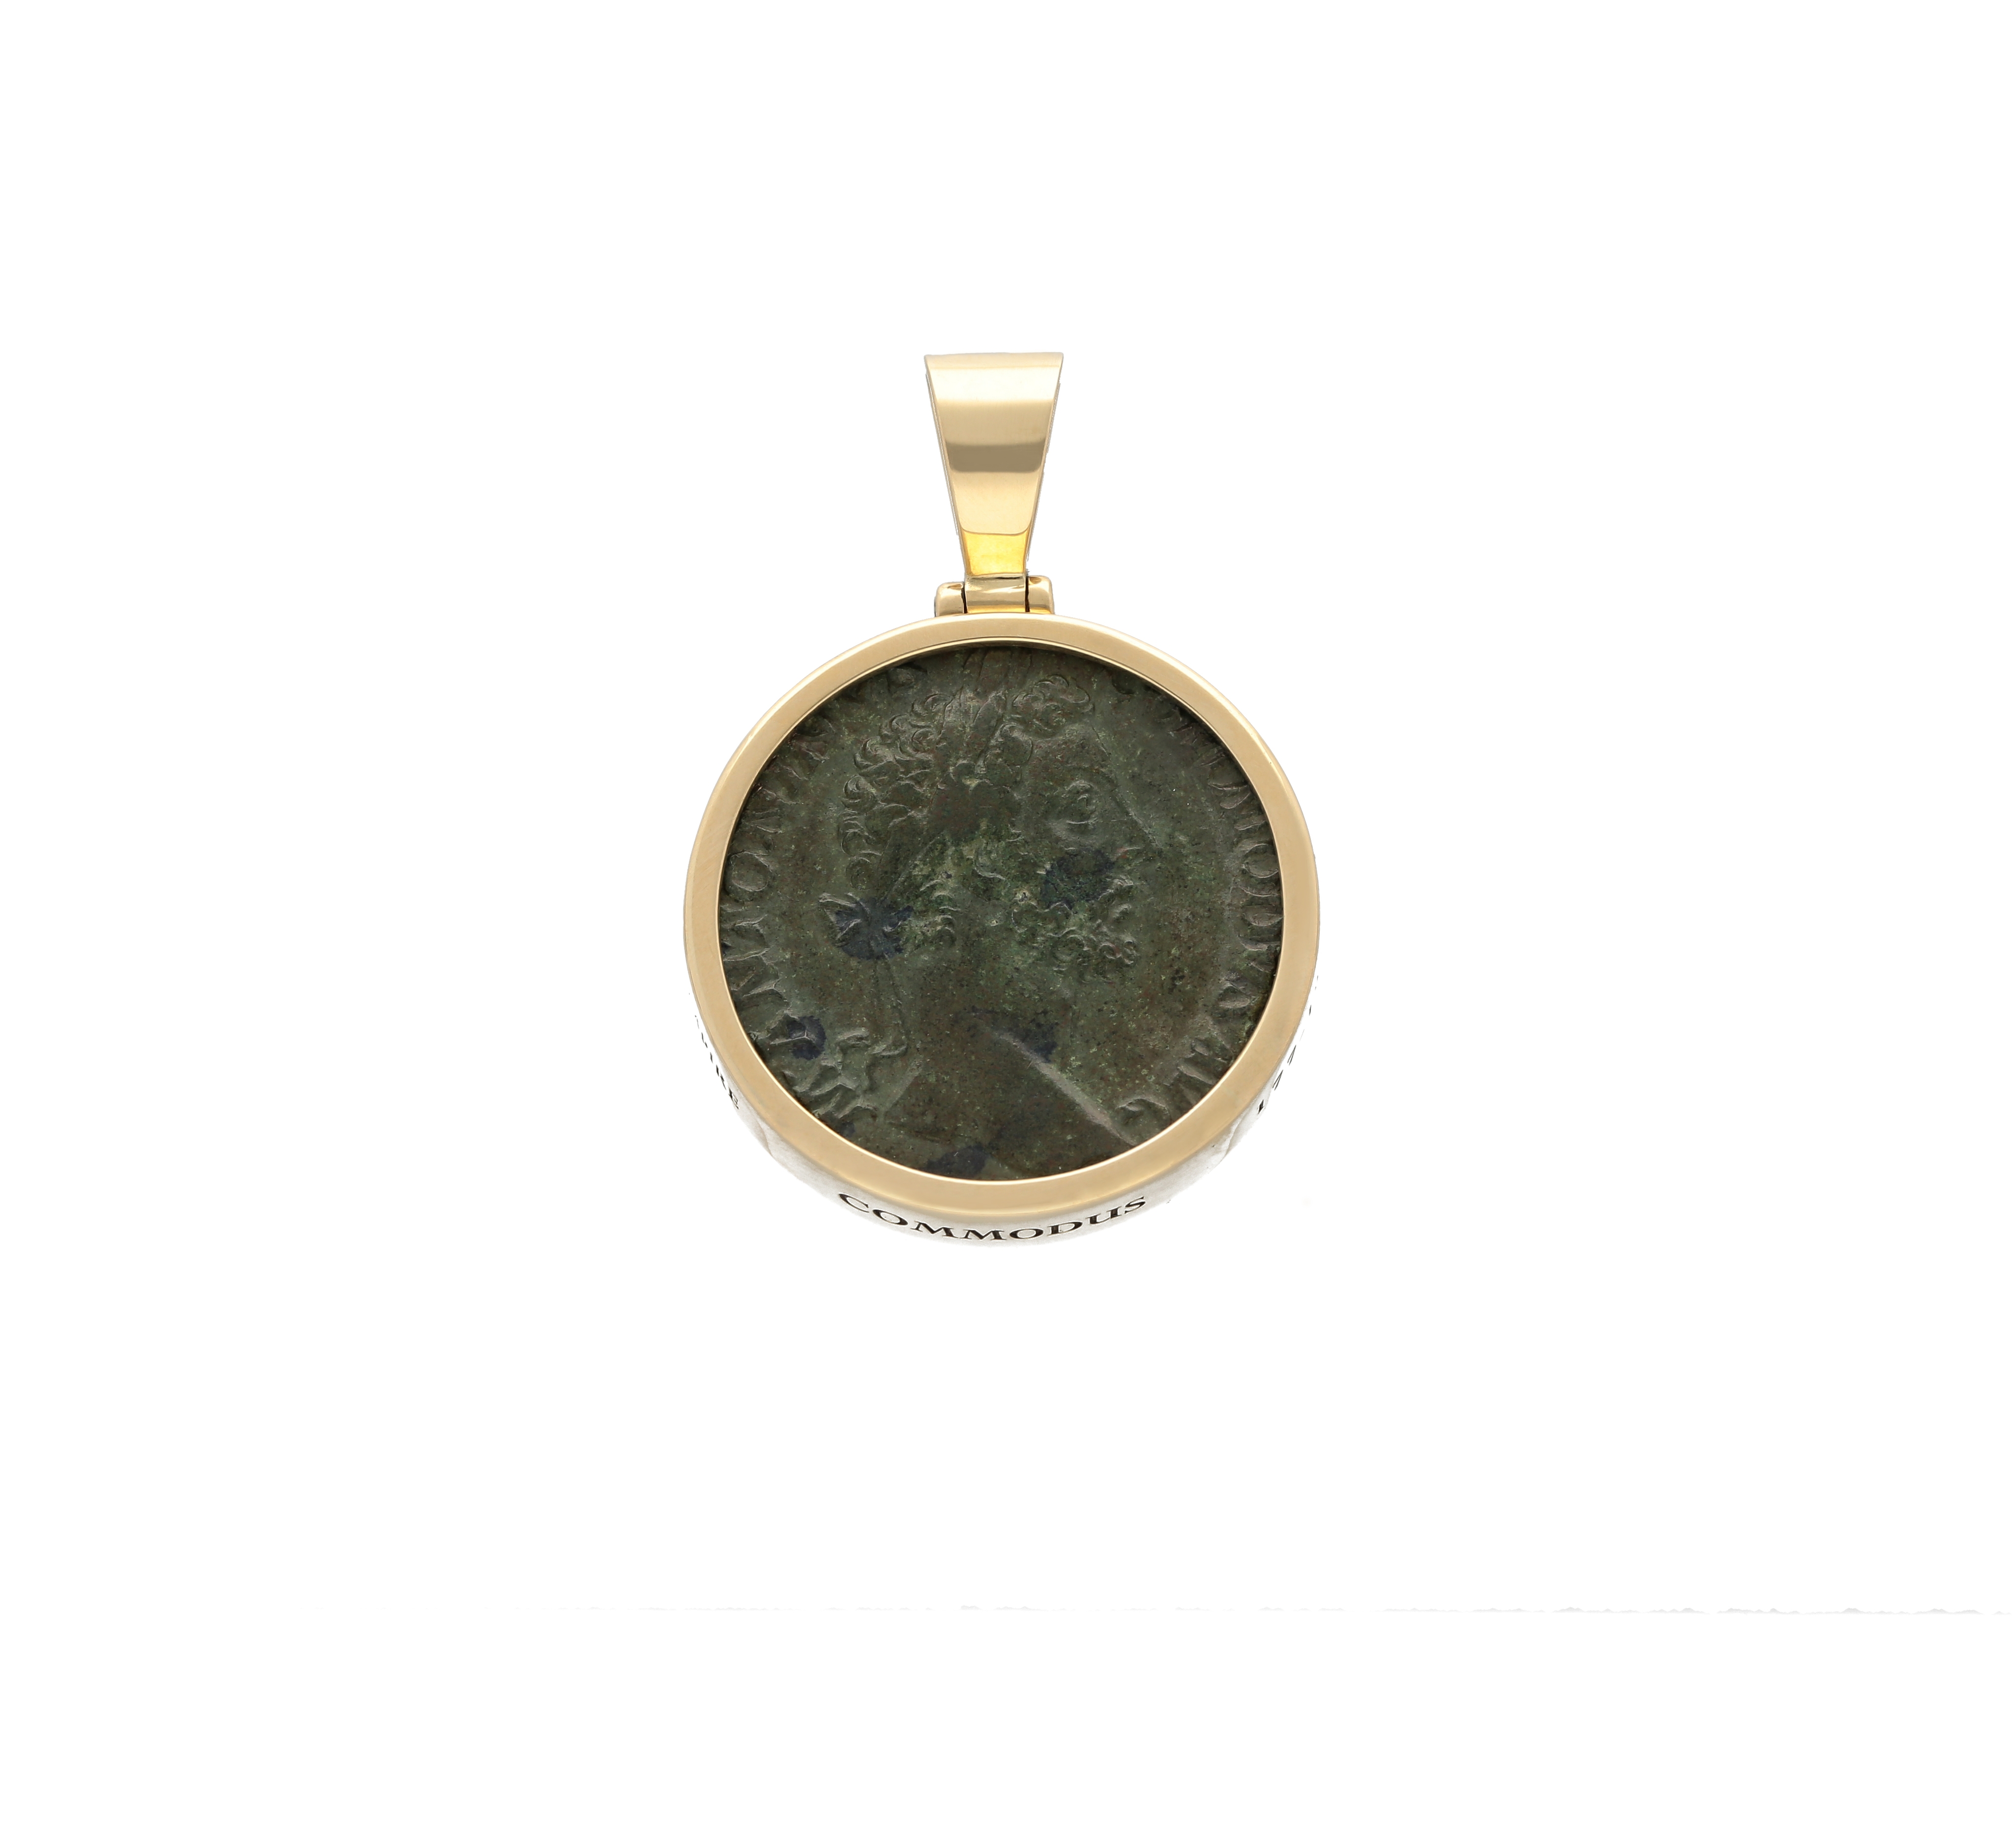 Emperor Commodus roman coin on 18kt yellow gold pendant